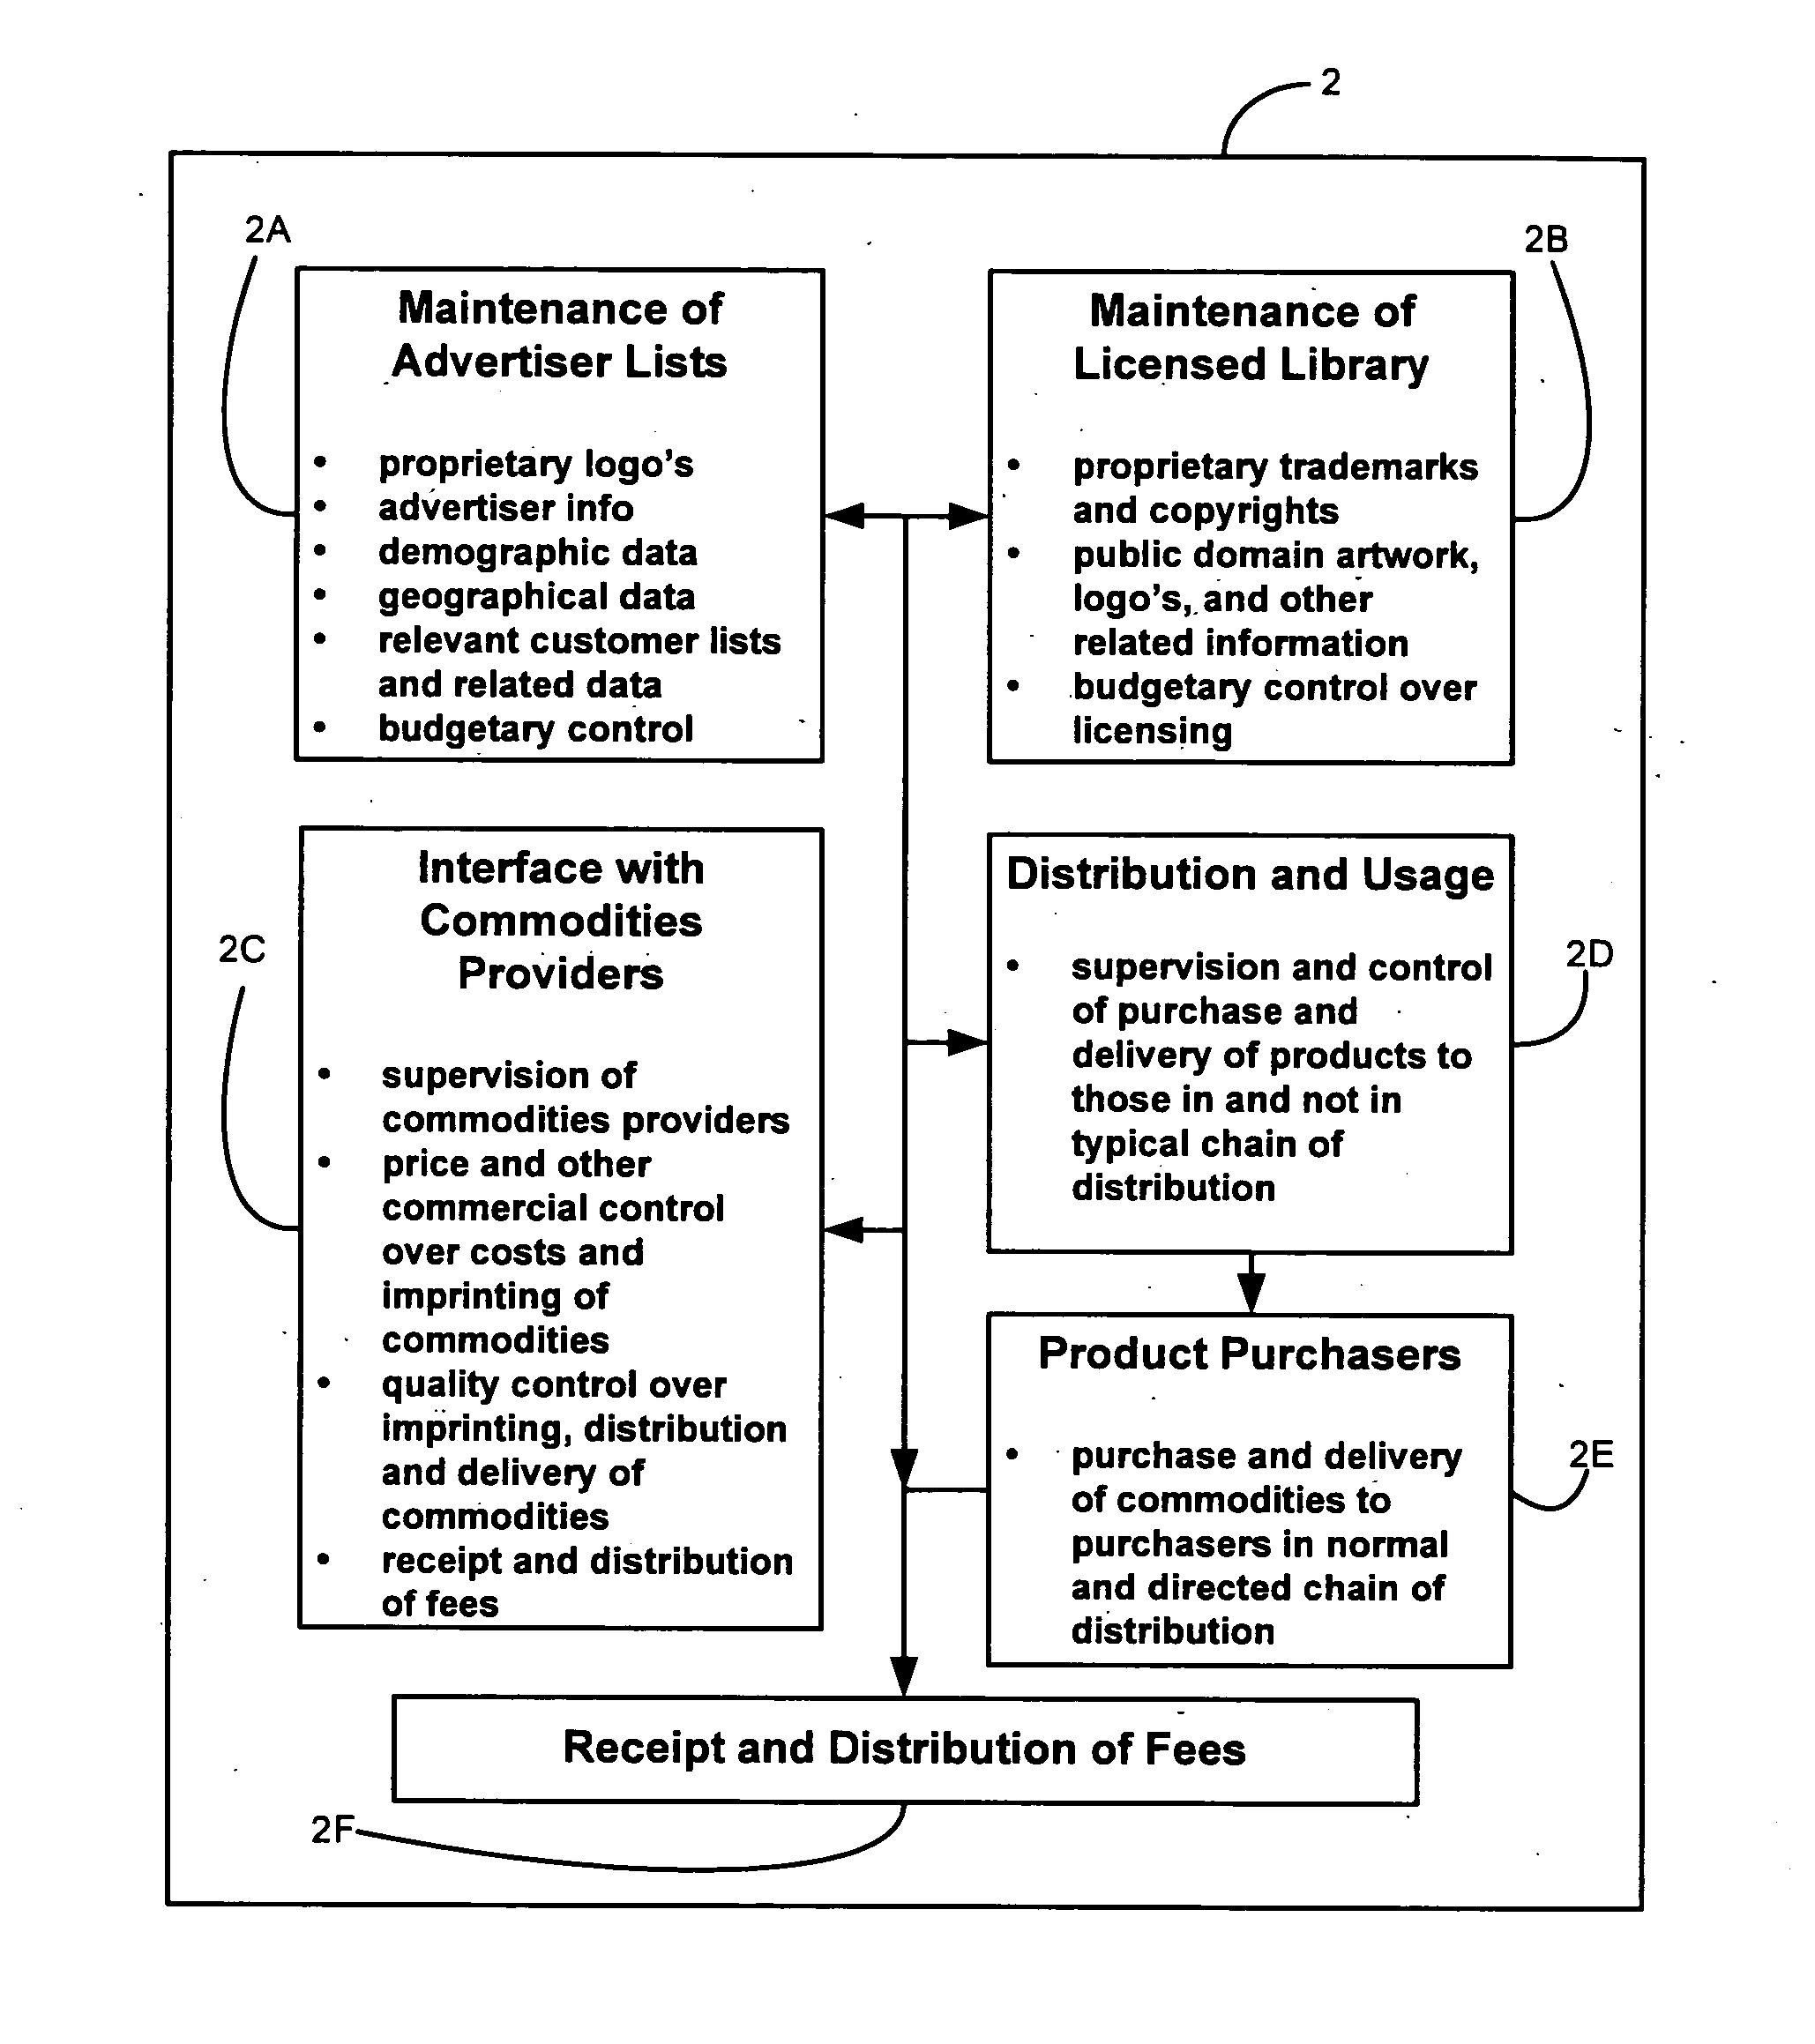 Method and system for the determination and dissemination of brand-related artwork on commodity-based products